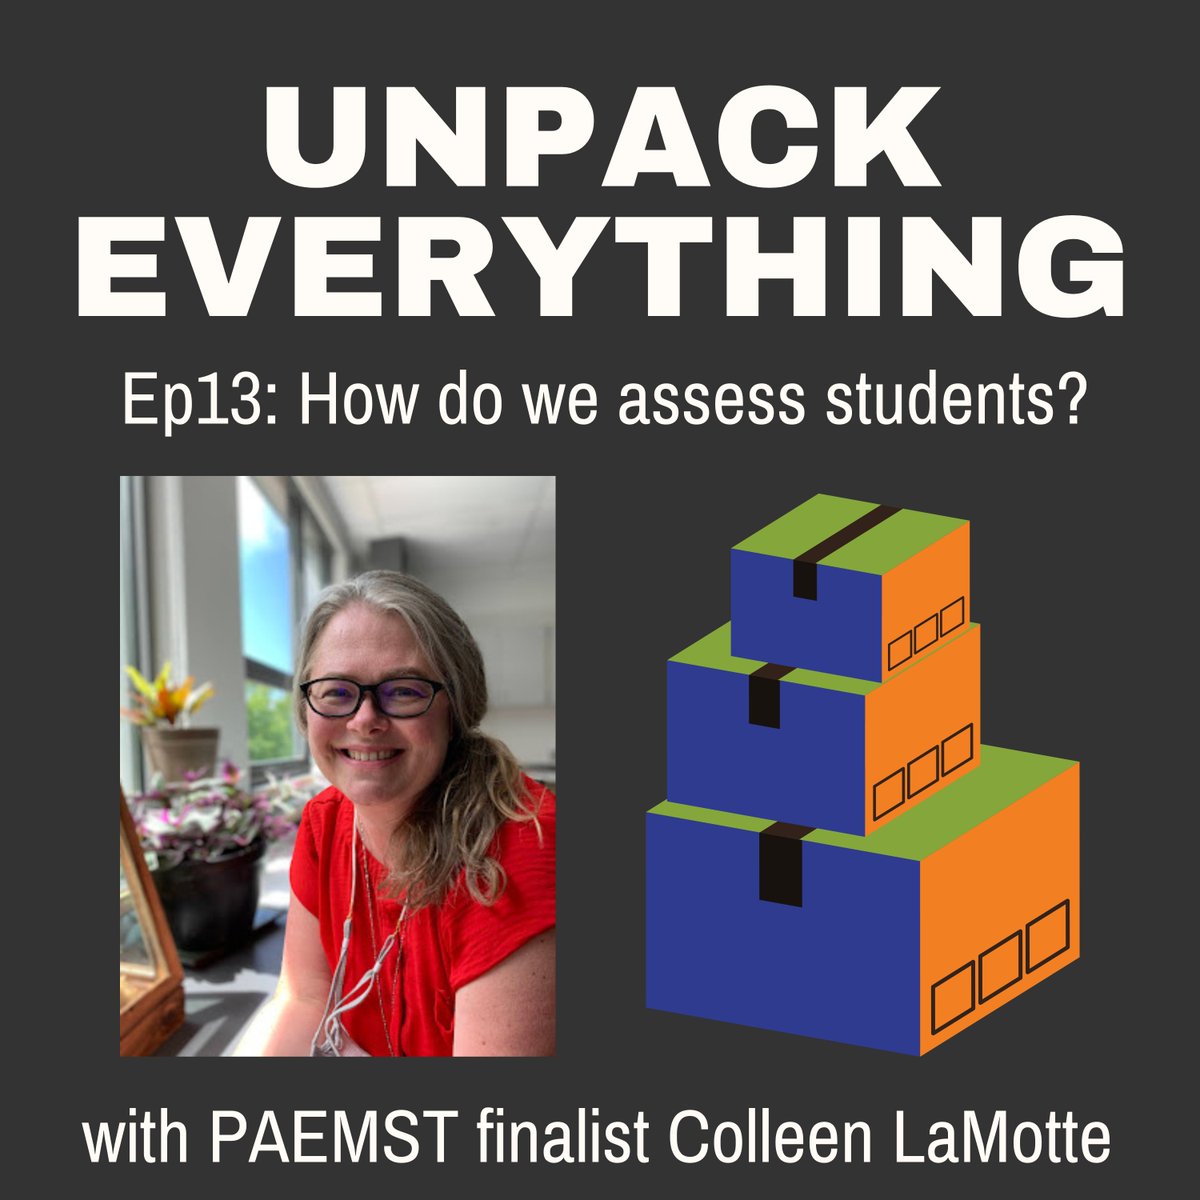 So pumped to share more assessment talk with @MsLaMomSci! open.spotify.com/episode/3eZG2r…